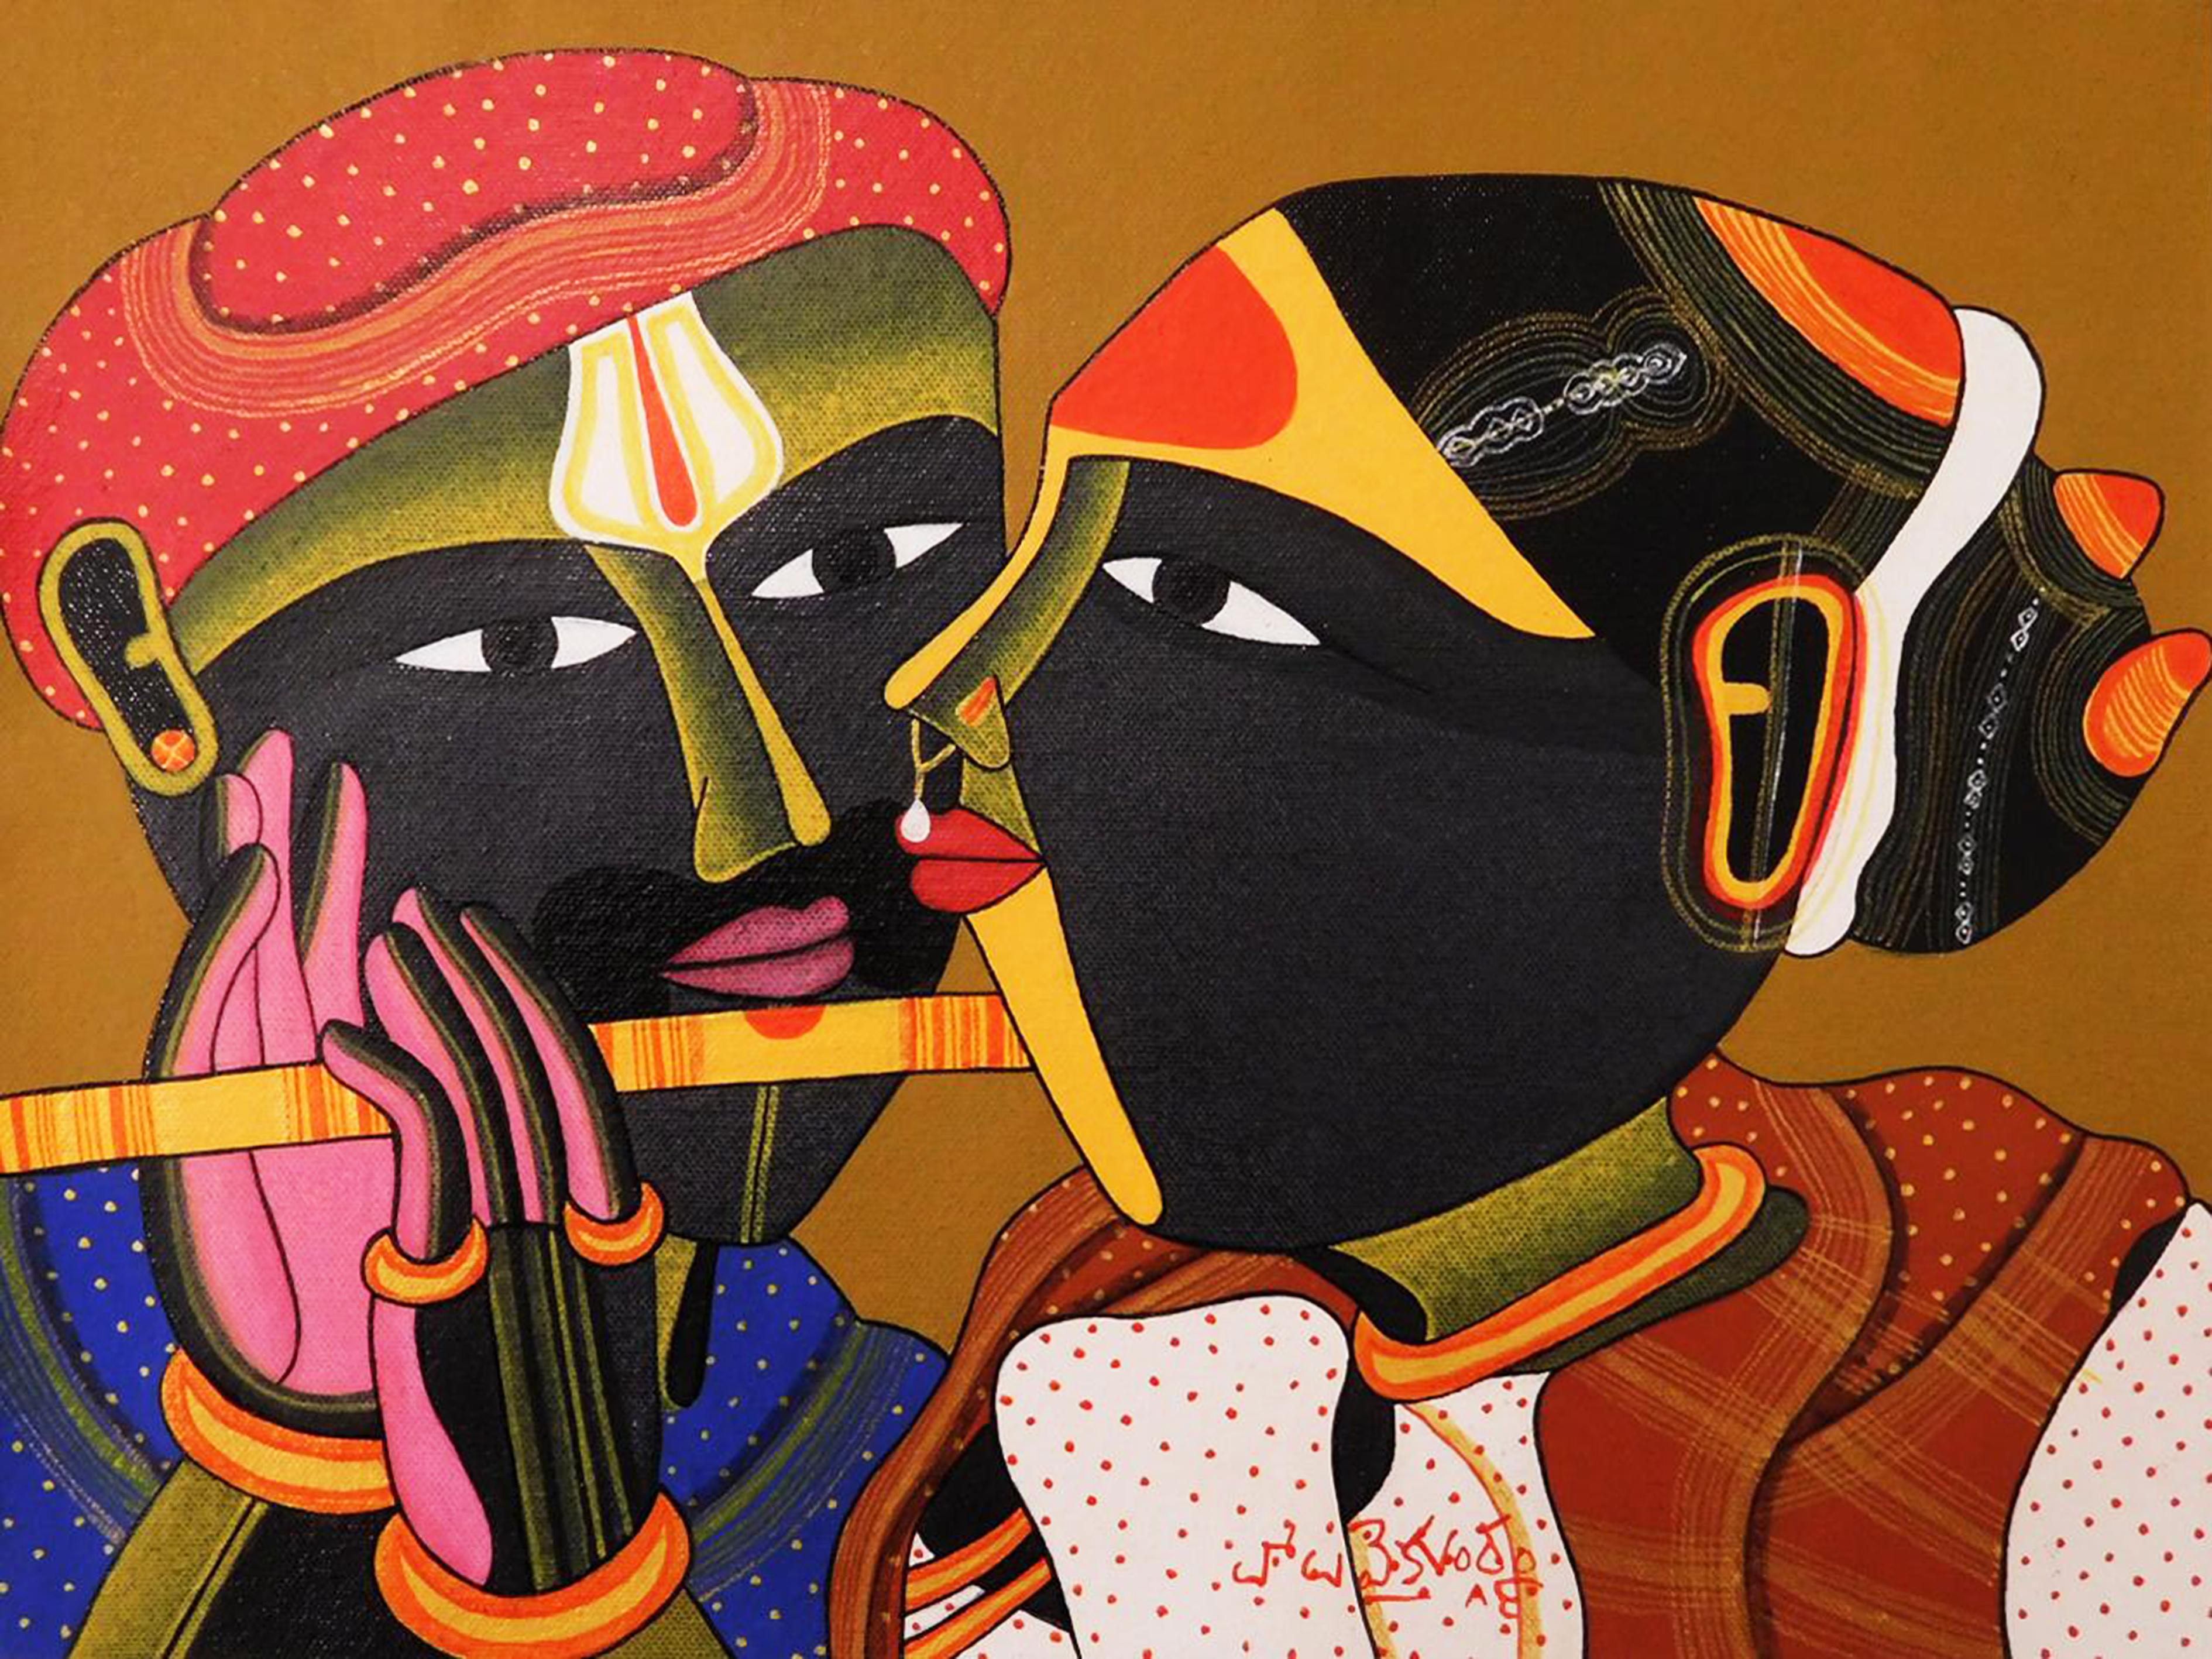 Thota Vaikuntam Portrait Painting - Telengana Couple, South Indian, Acrylic on Canvas, Red, Yellow, Brown "In Stock"